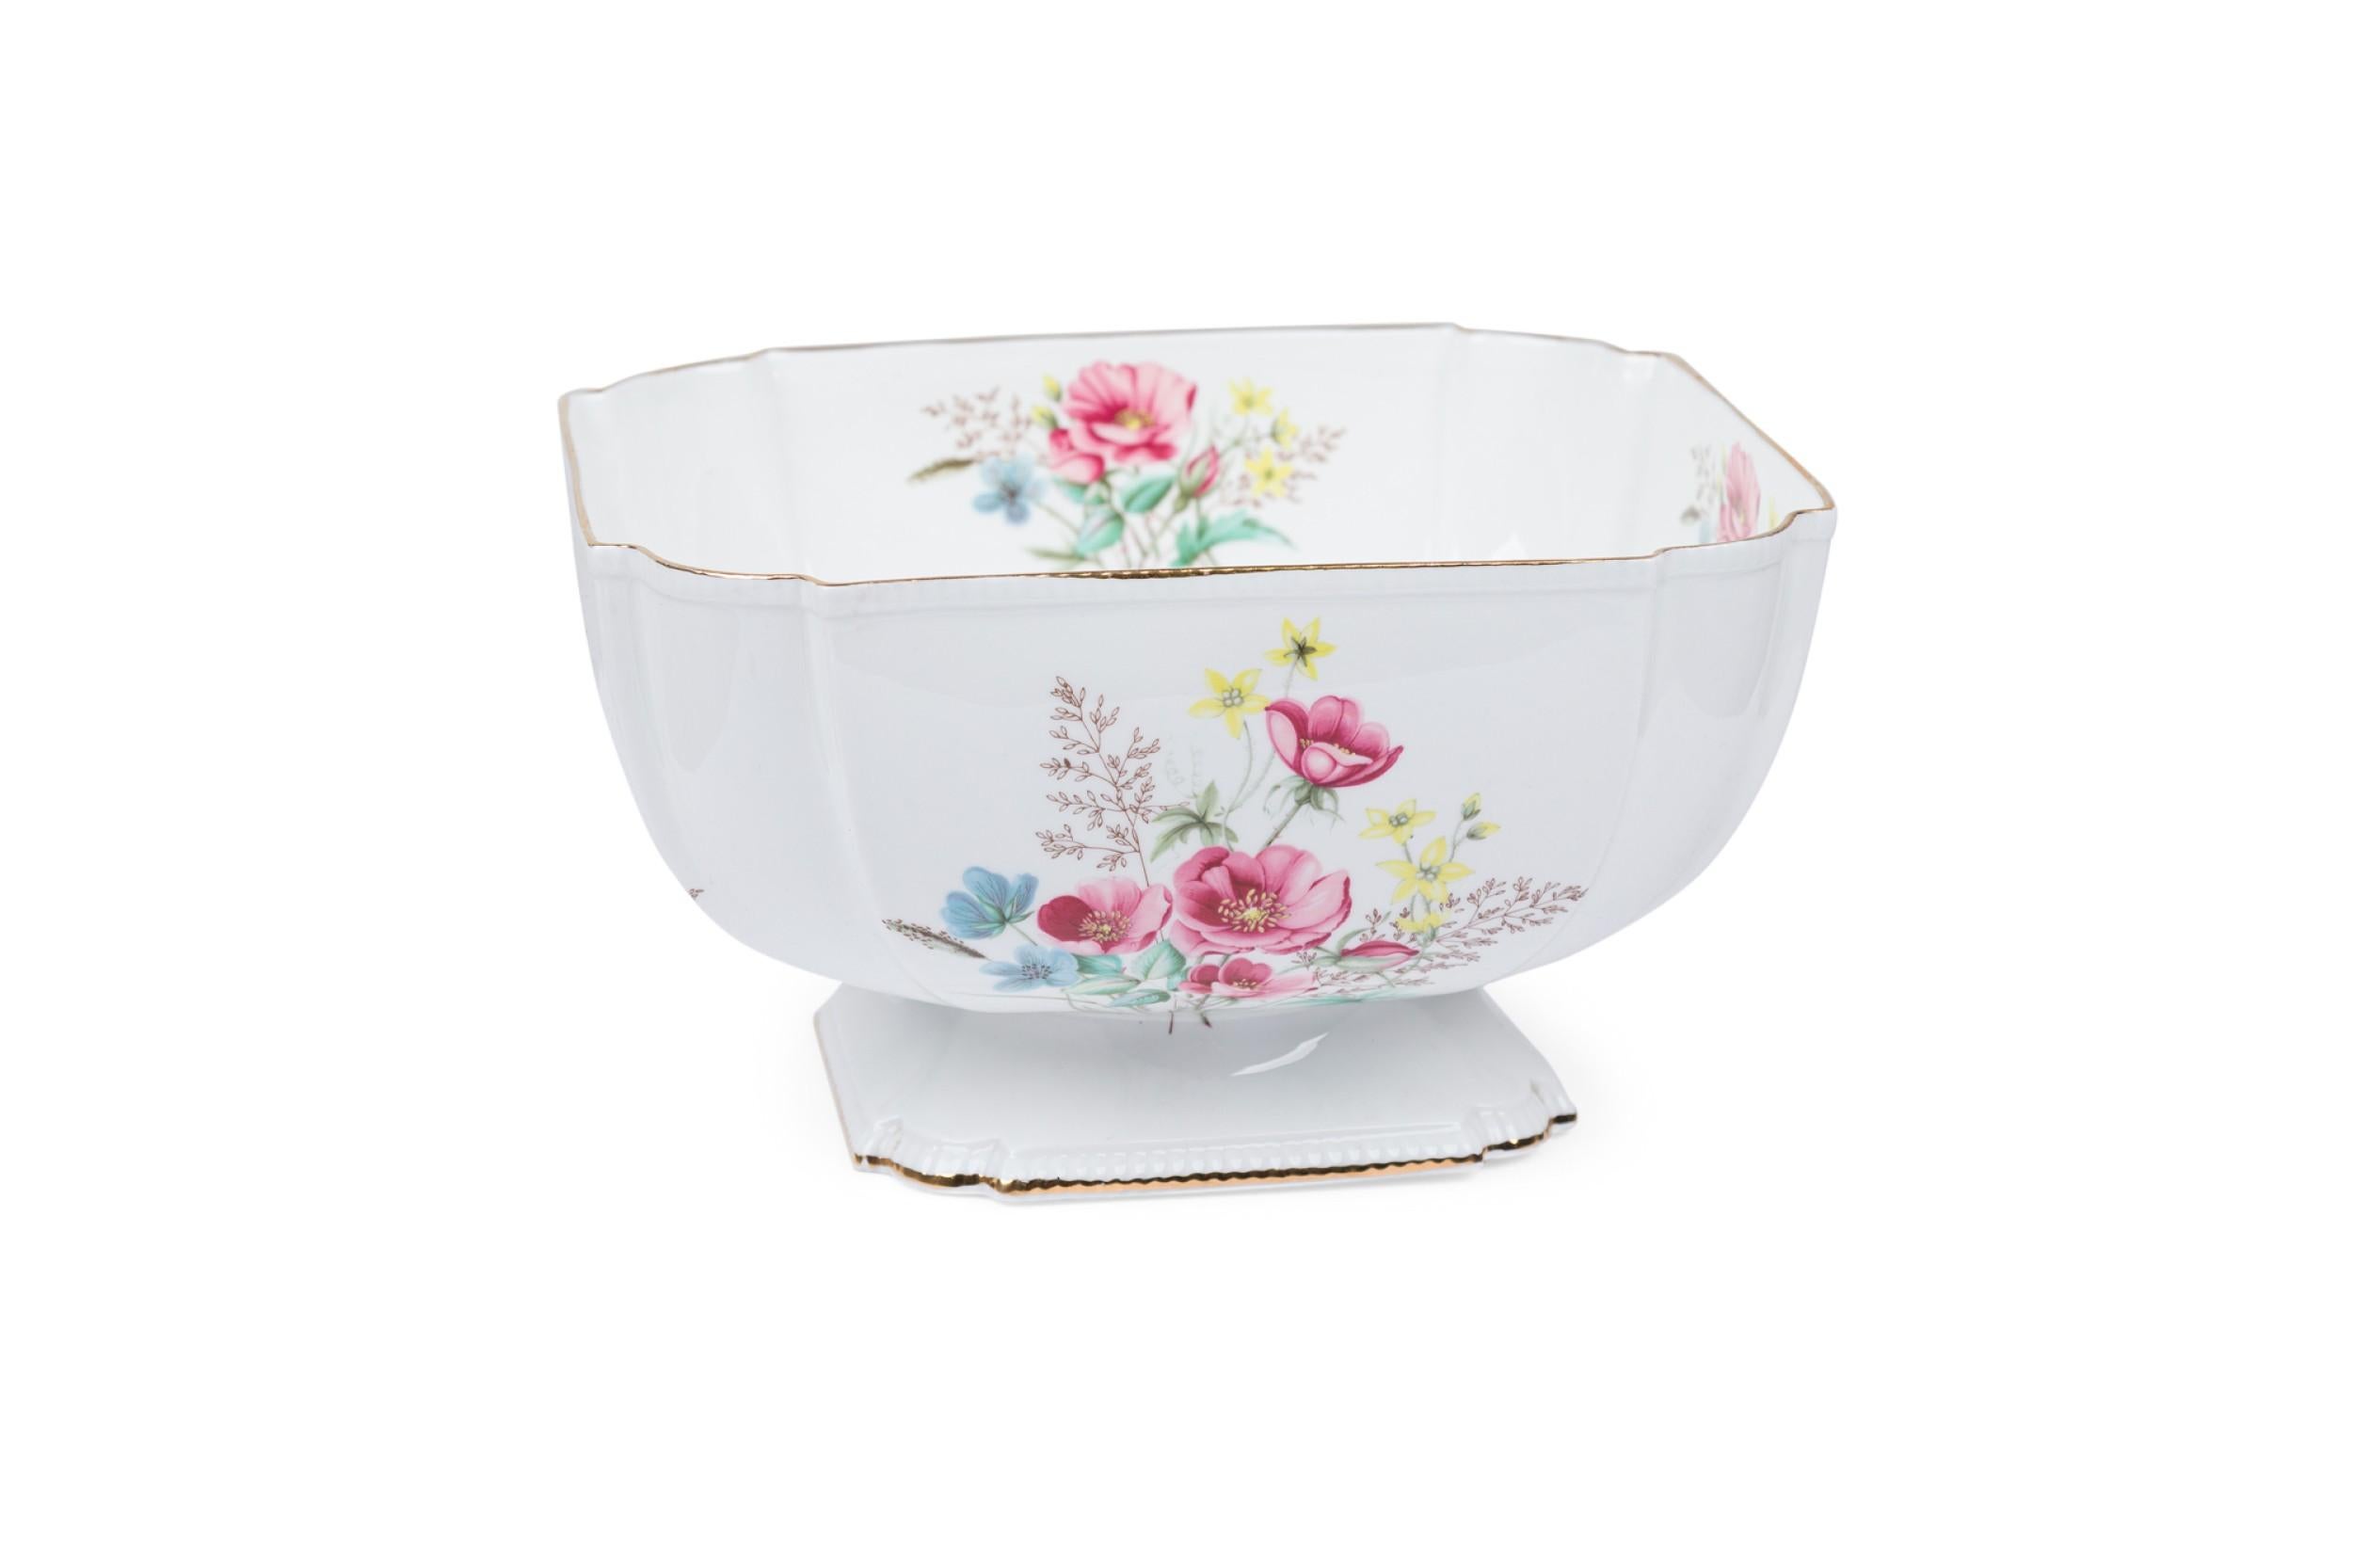 Mid-Century Modern Aynsley Mid-Century English Bone China Centerpiece Bowl with Floral Decoration For Sale